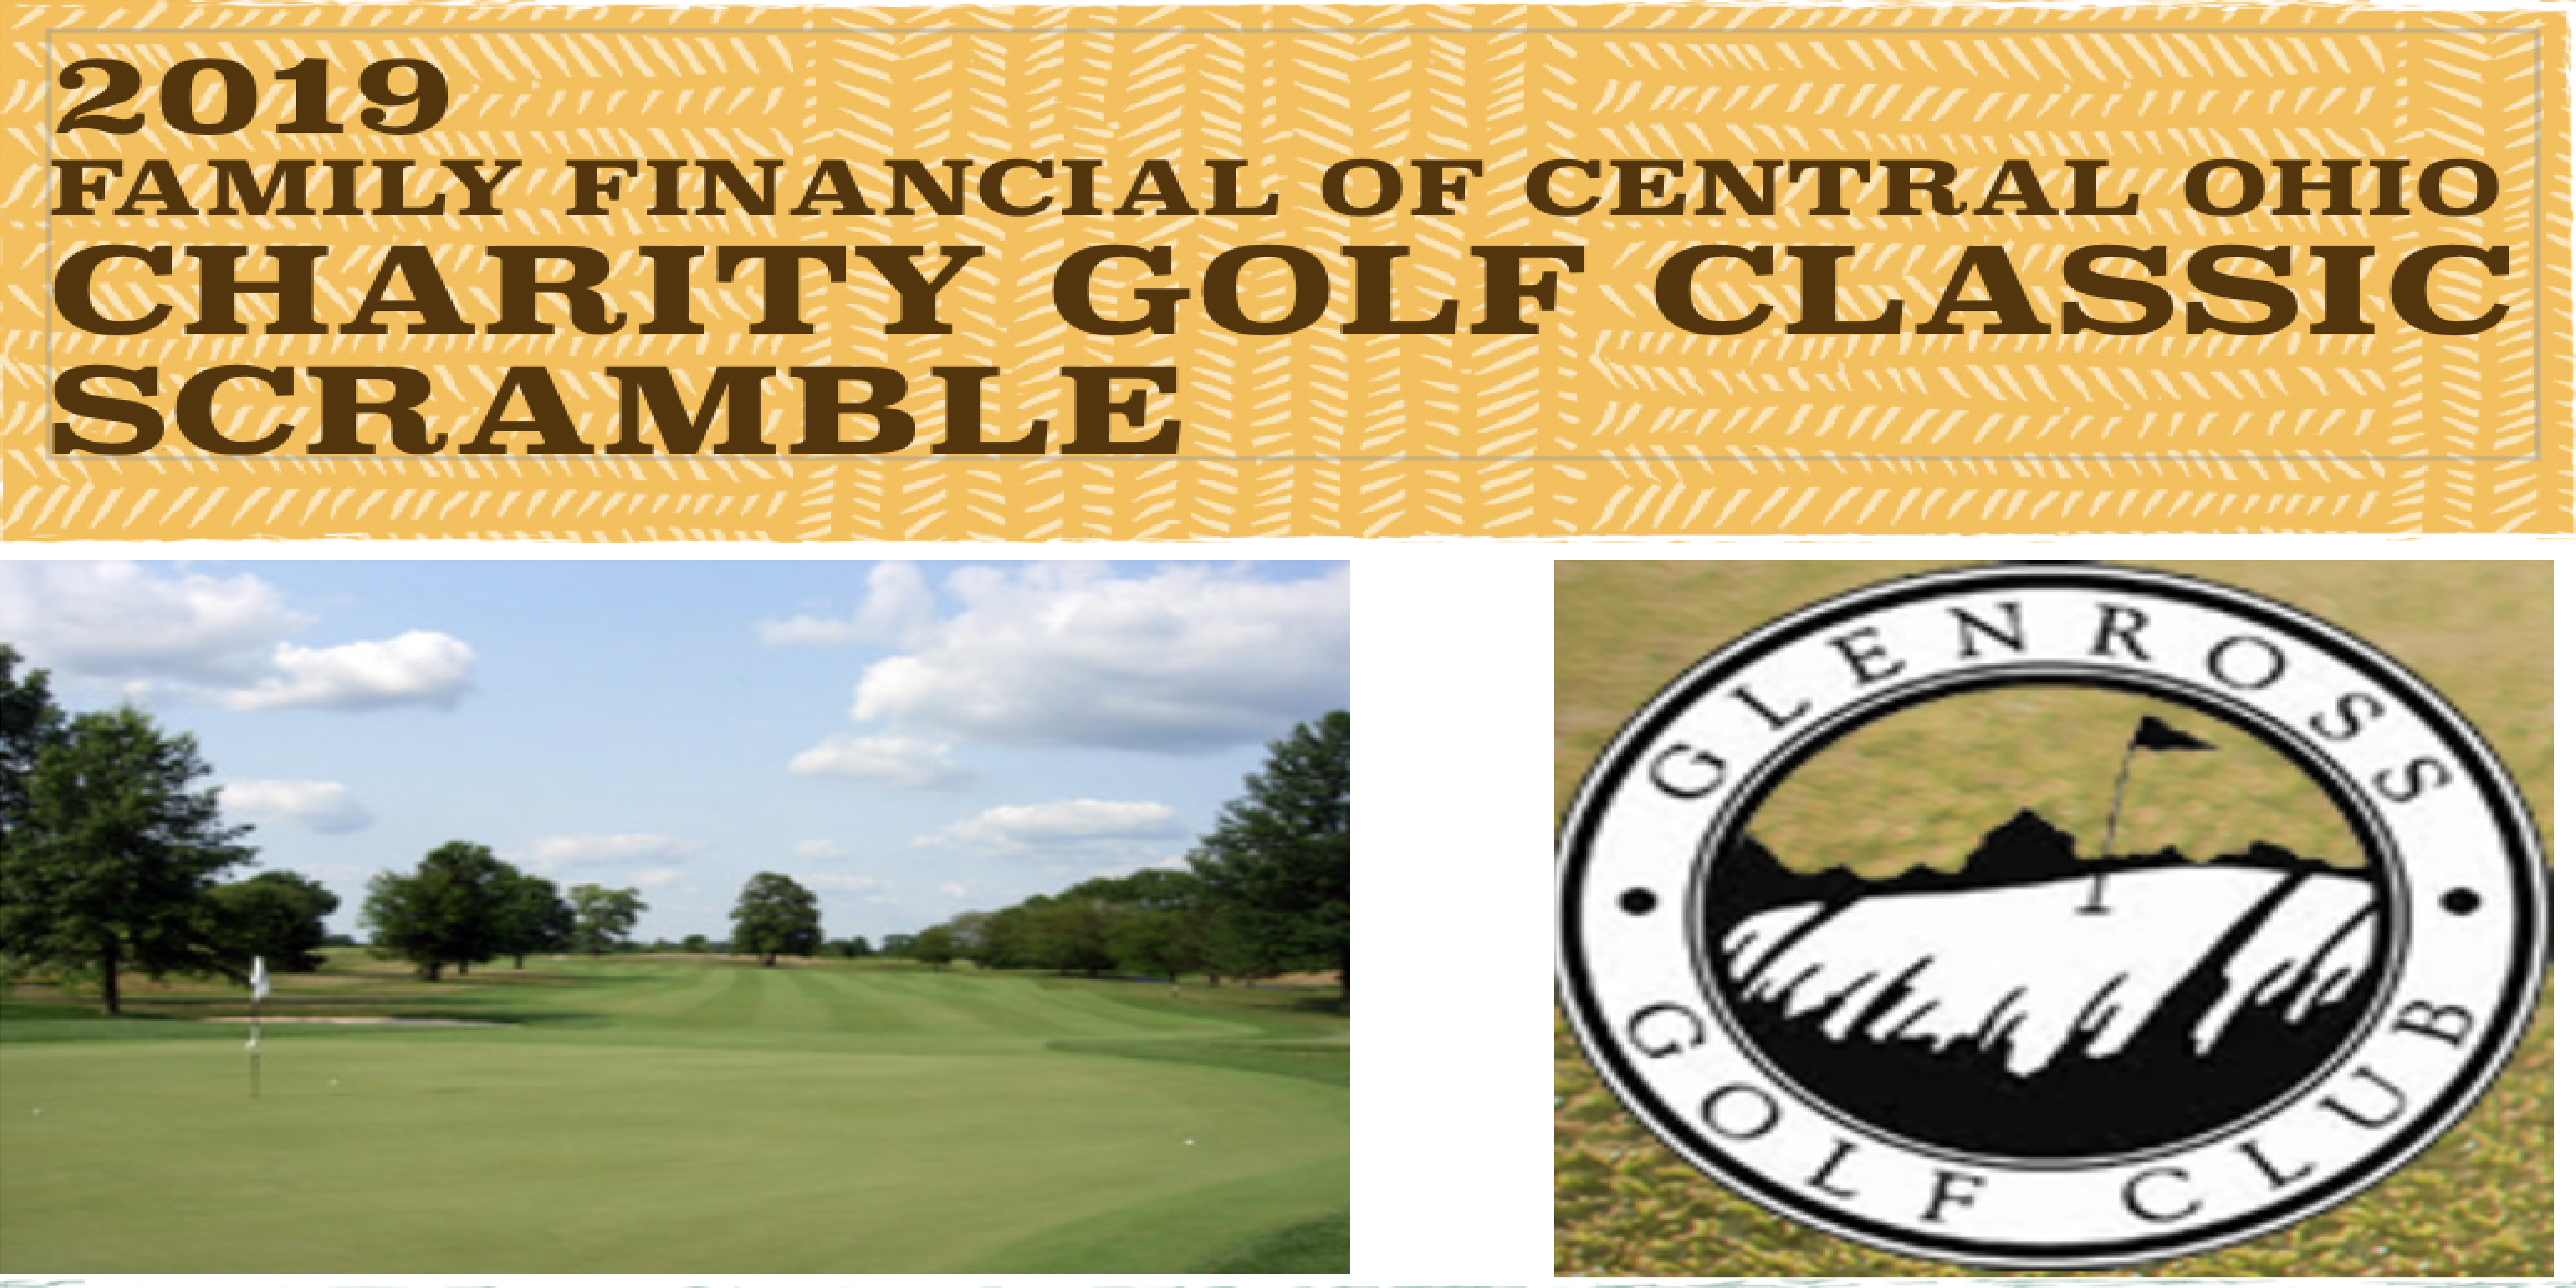 EVENT CANCELED: 2019 Family Financial CHARITY Golf Classic Scramble